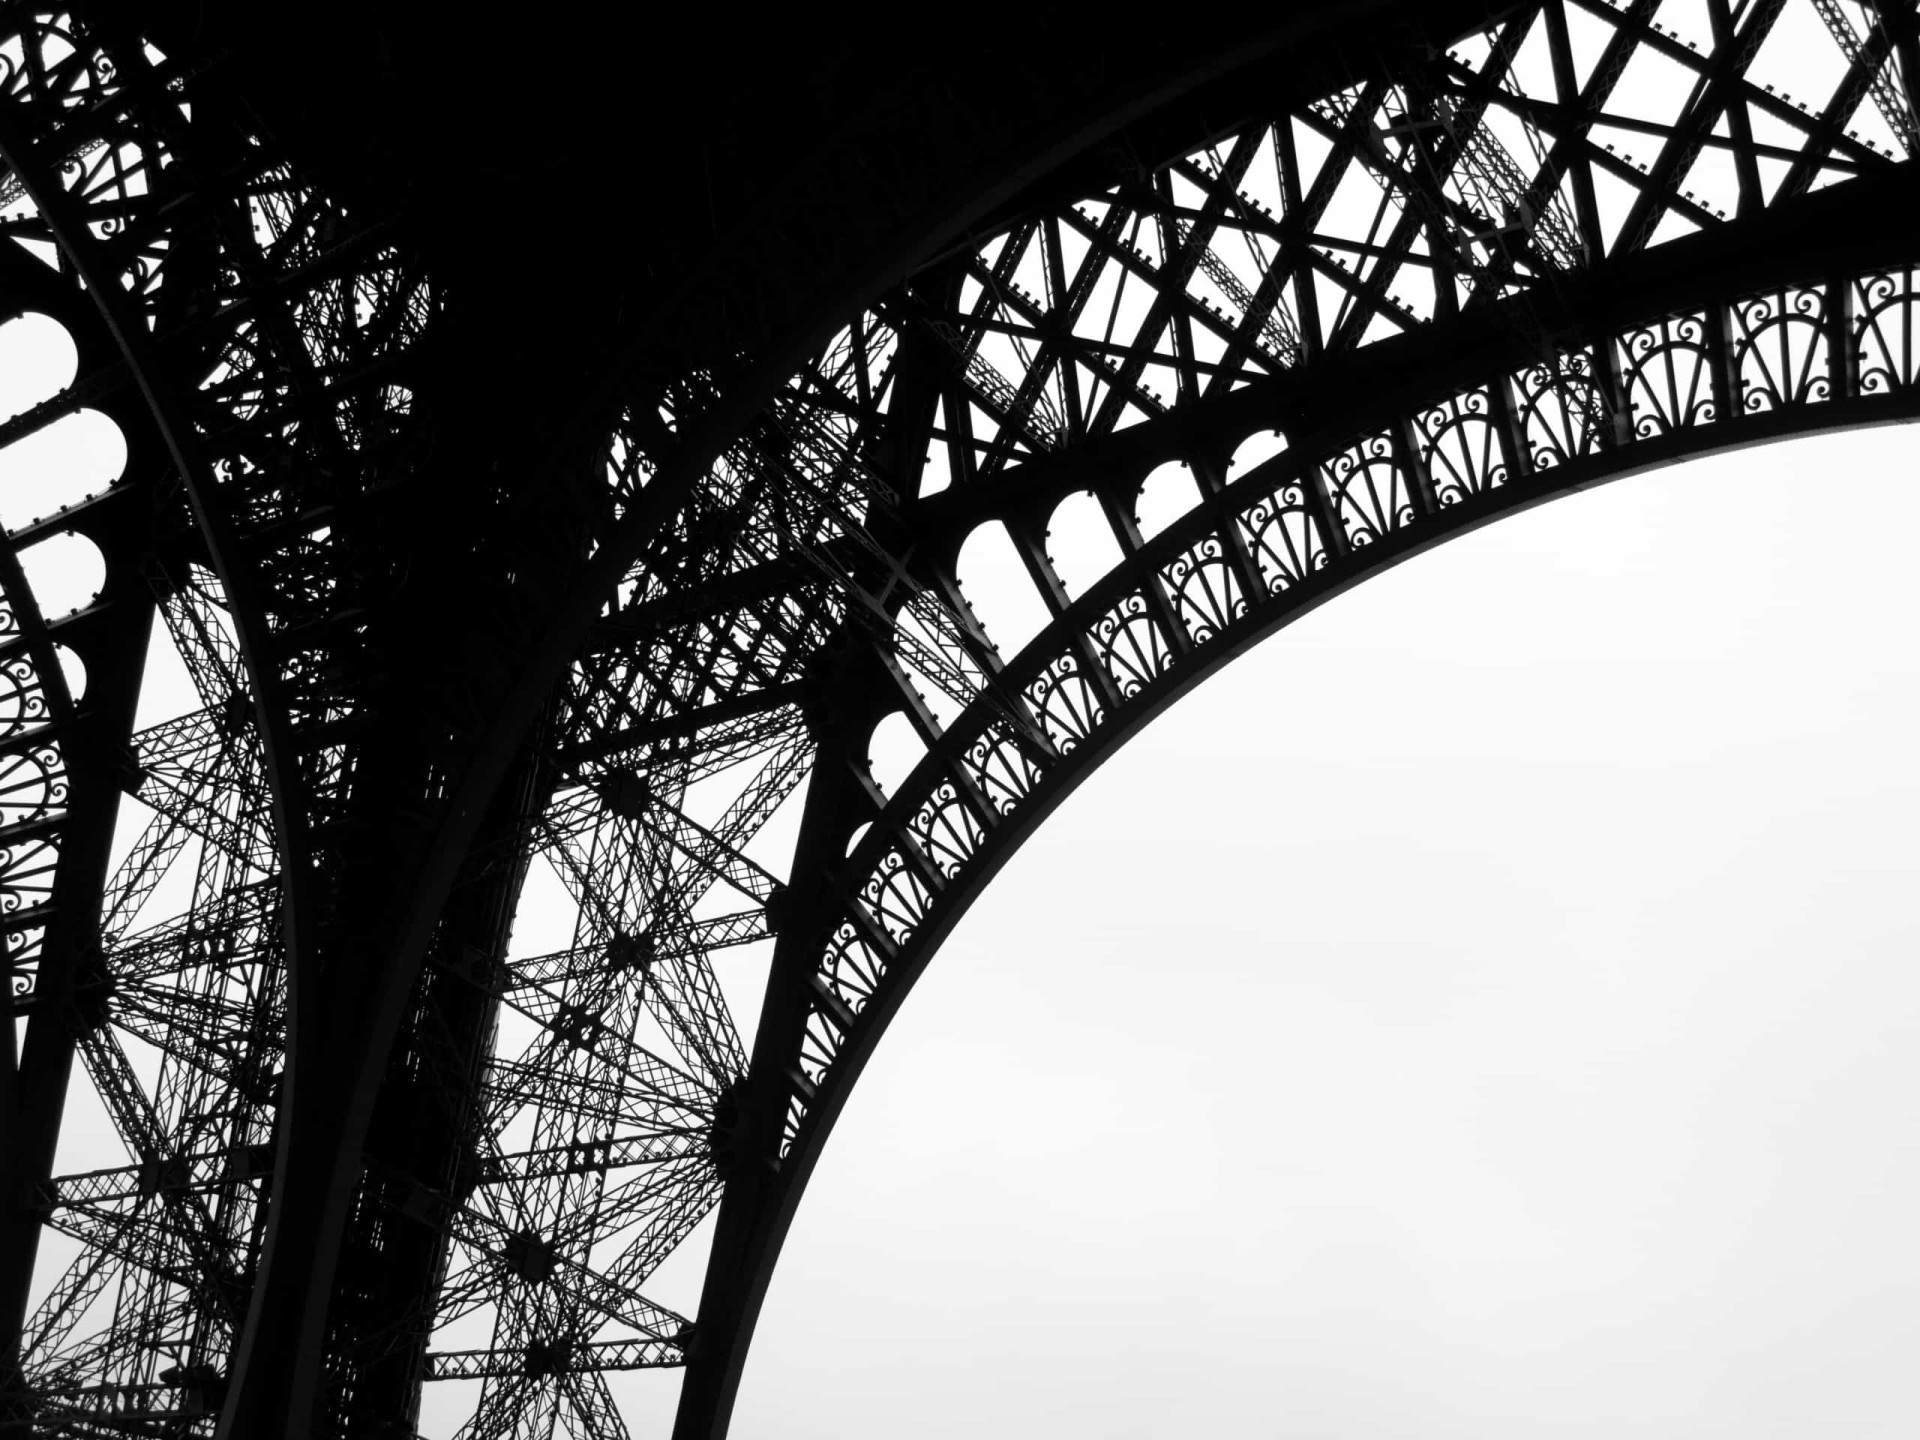 <p>The Eiffel Tower was supposed to be demolished in 1909. However, the decision was overturned when it began to be used as a huge radio antenna.</p><p><a href="https://www.msn.com/en-us/community/channel/vid-7xx8mnucu55yw63we9va2gwr7uihbxwc68fxqp25x6tg4ftibpra?cvid=94631541bc0f4f89bfd59158d696ad7e">Follow us and access great exclusive content every day</a></p>